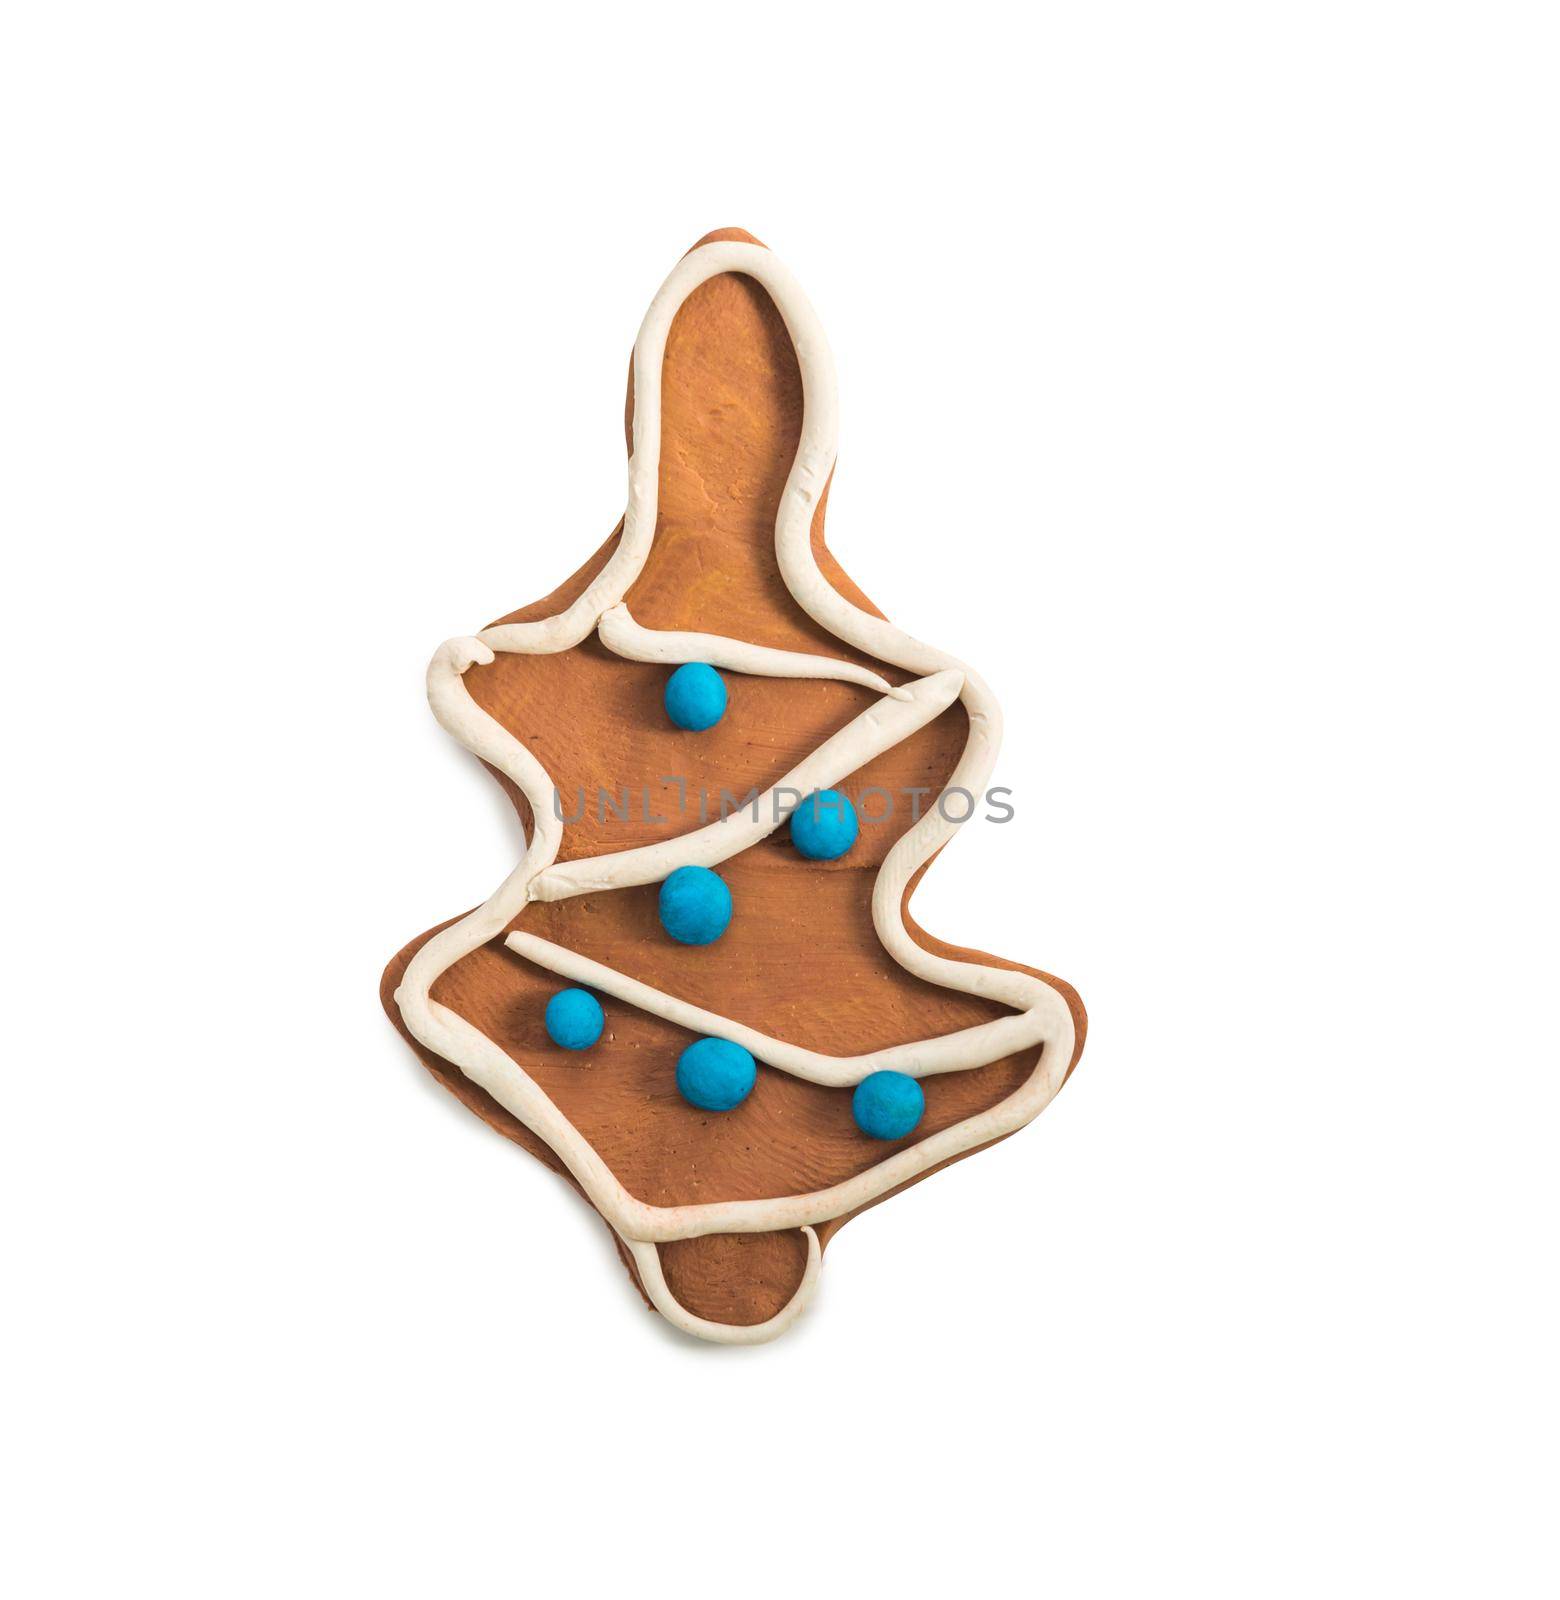 plasticine figure in a gingerbread shape of christmas tree isolated on white background